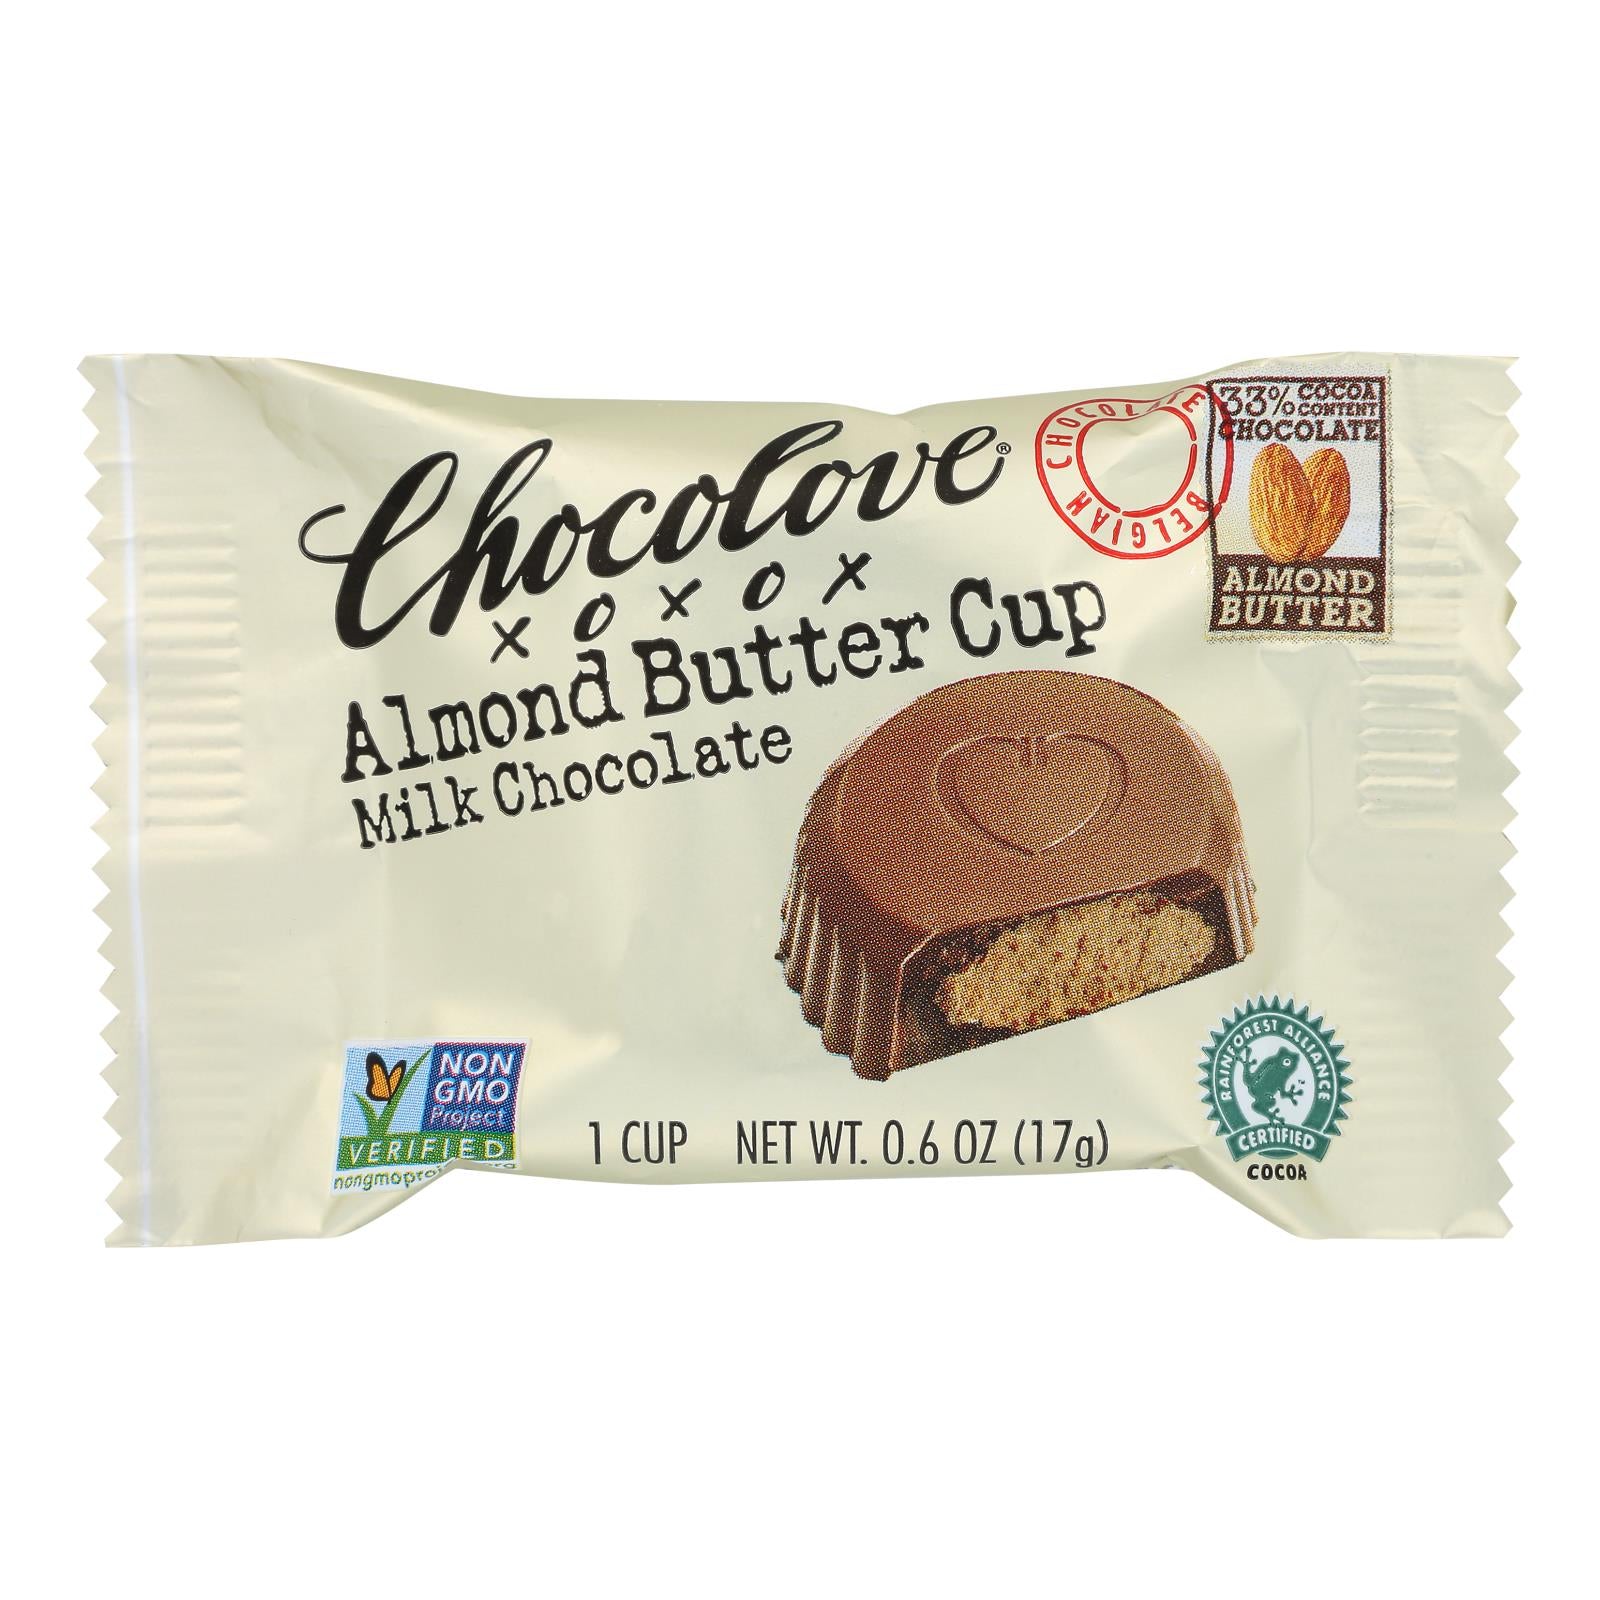 Chocolove Xoxox - Cup - Almond Butter - Milk Chocolate - Case of 50 - .6 oz